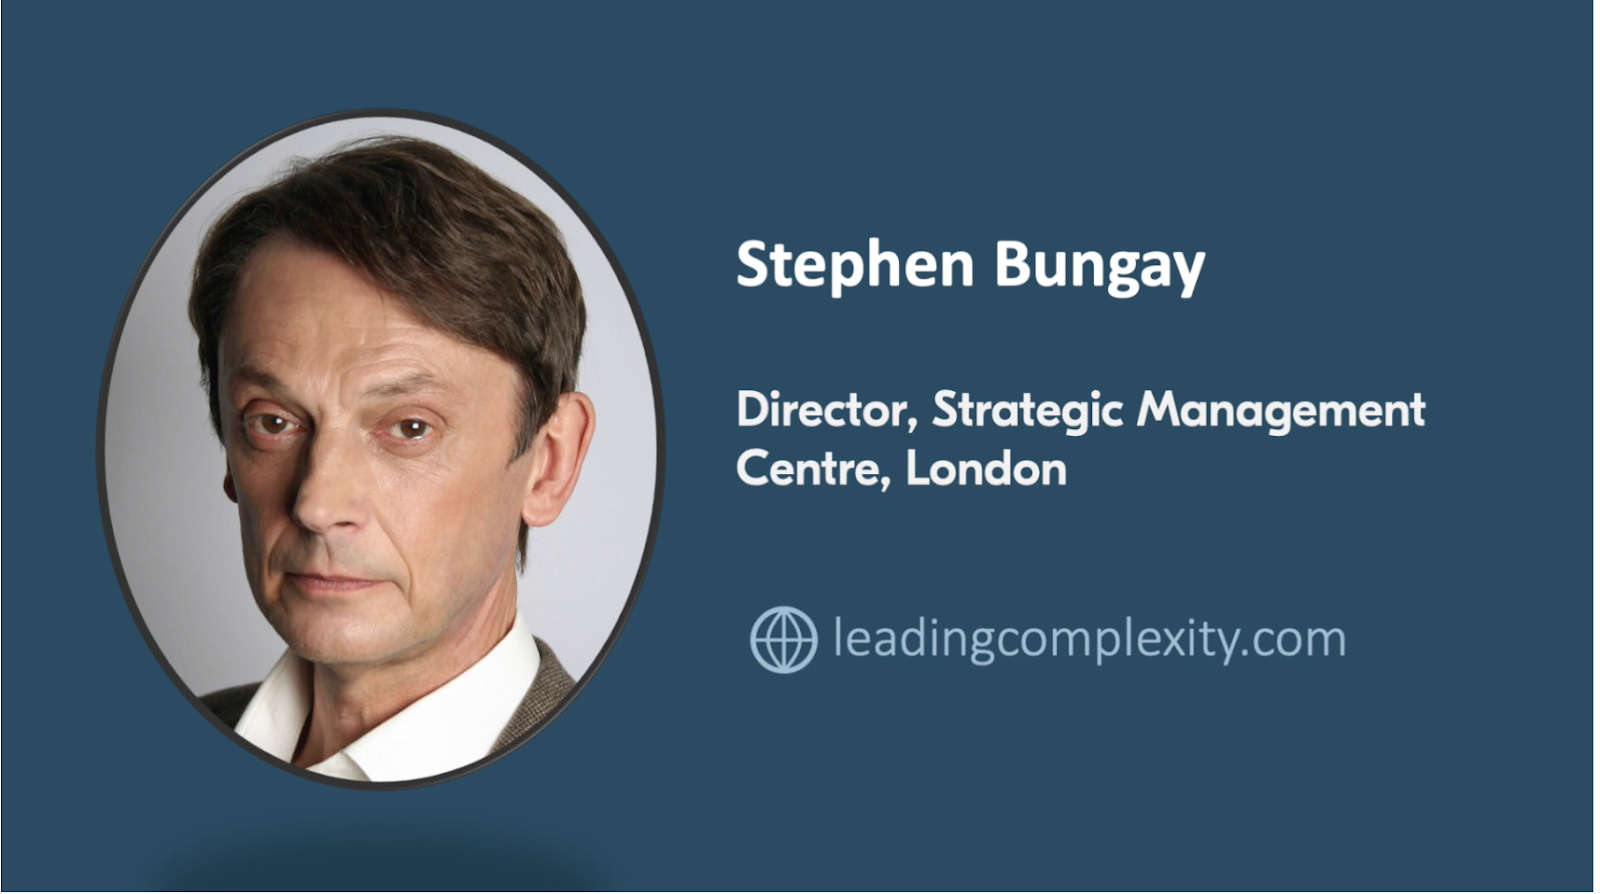 Continue reading: Stephen Bungay and the Art of Leadership